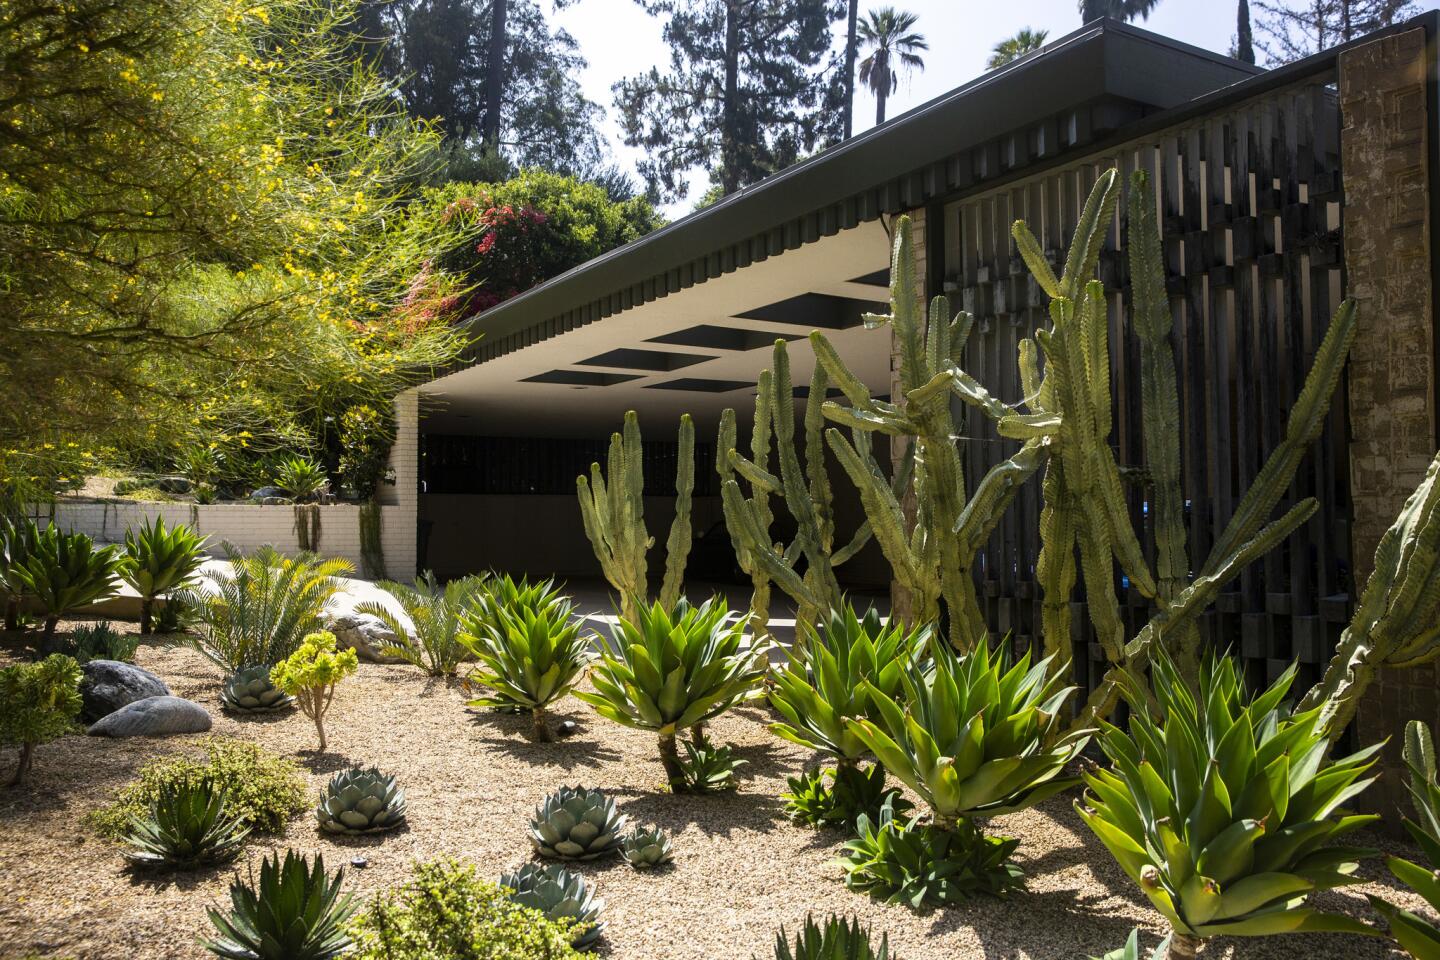 A new frought-friendly garden for their new Mid-century Modern home